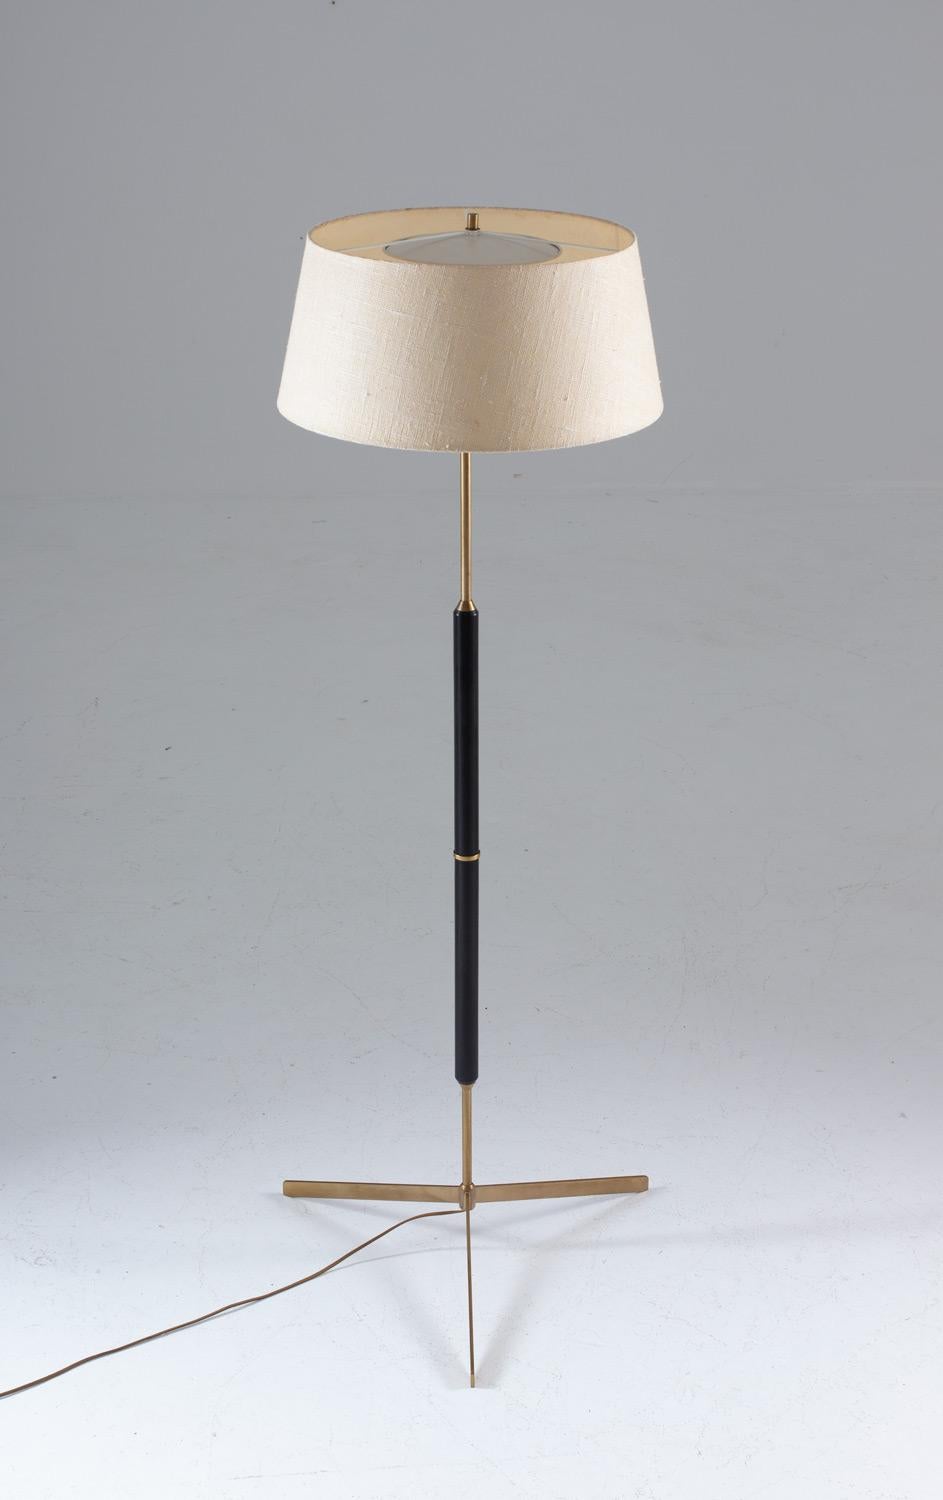 Scandinavian midcentury tripod floor lamp in brass and wood, model G-31 by Bergboms, Sweden, 1950s.
This lamp is made of solid brass, with details of black painted wood. The lamp comes with its original shade.

Condition: Very good/excellent